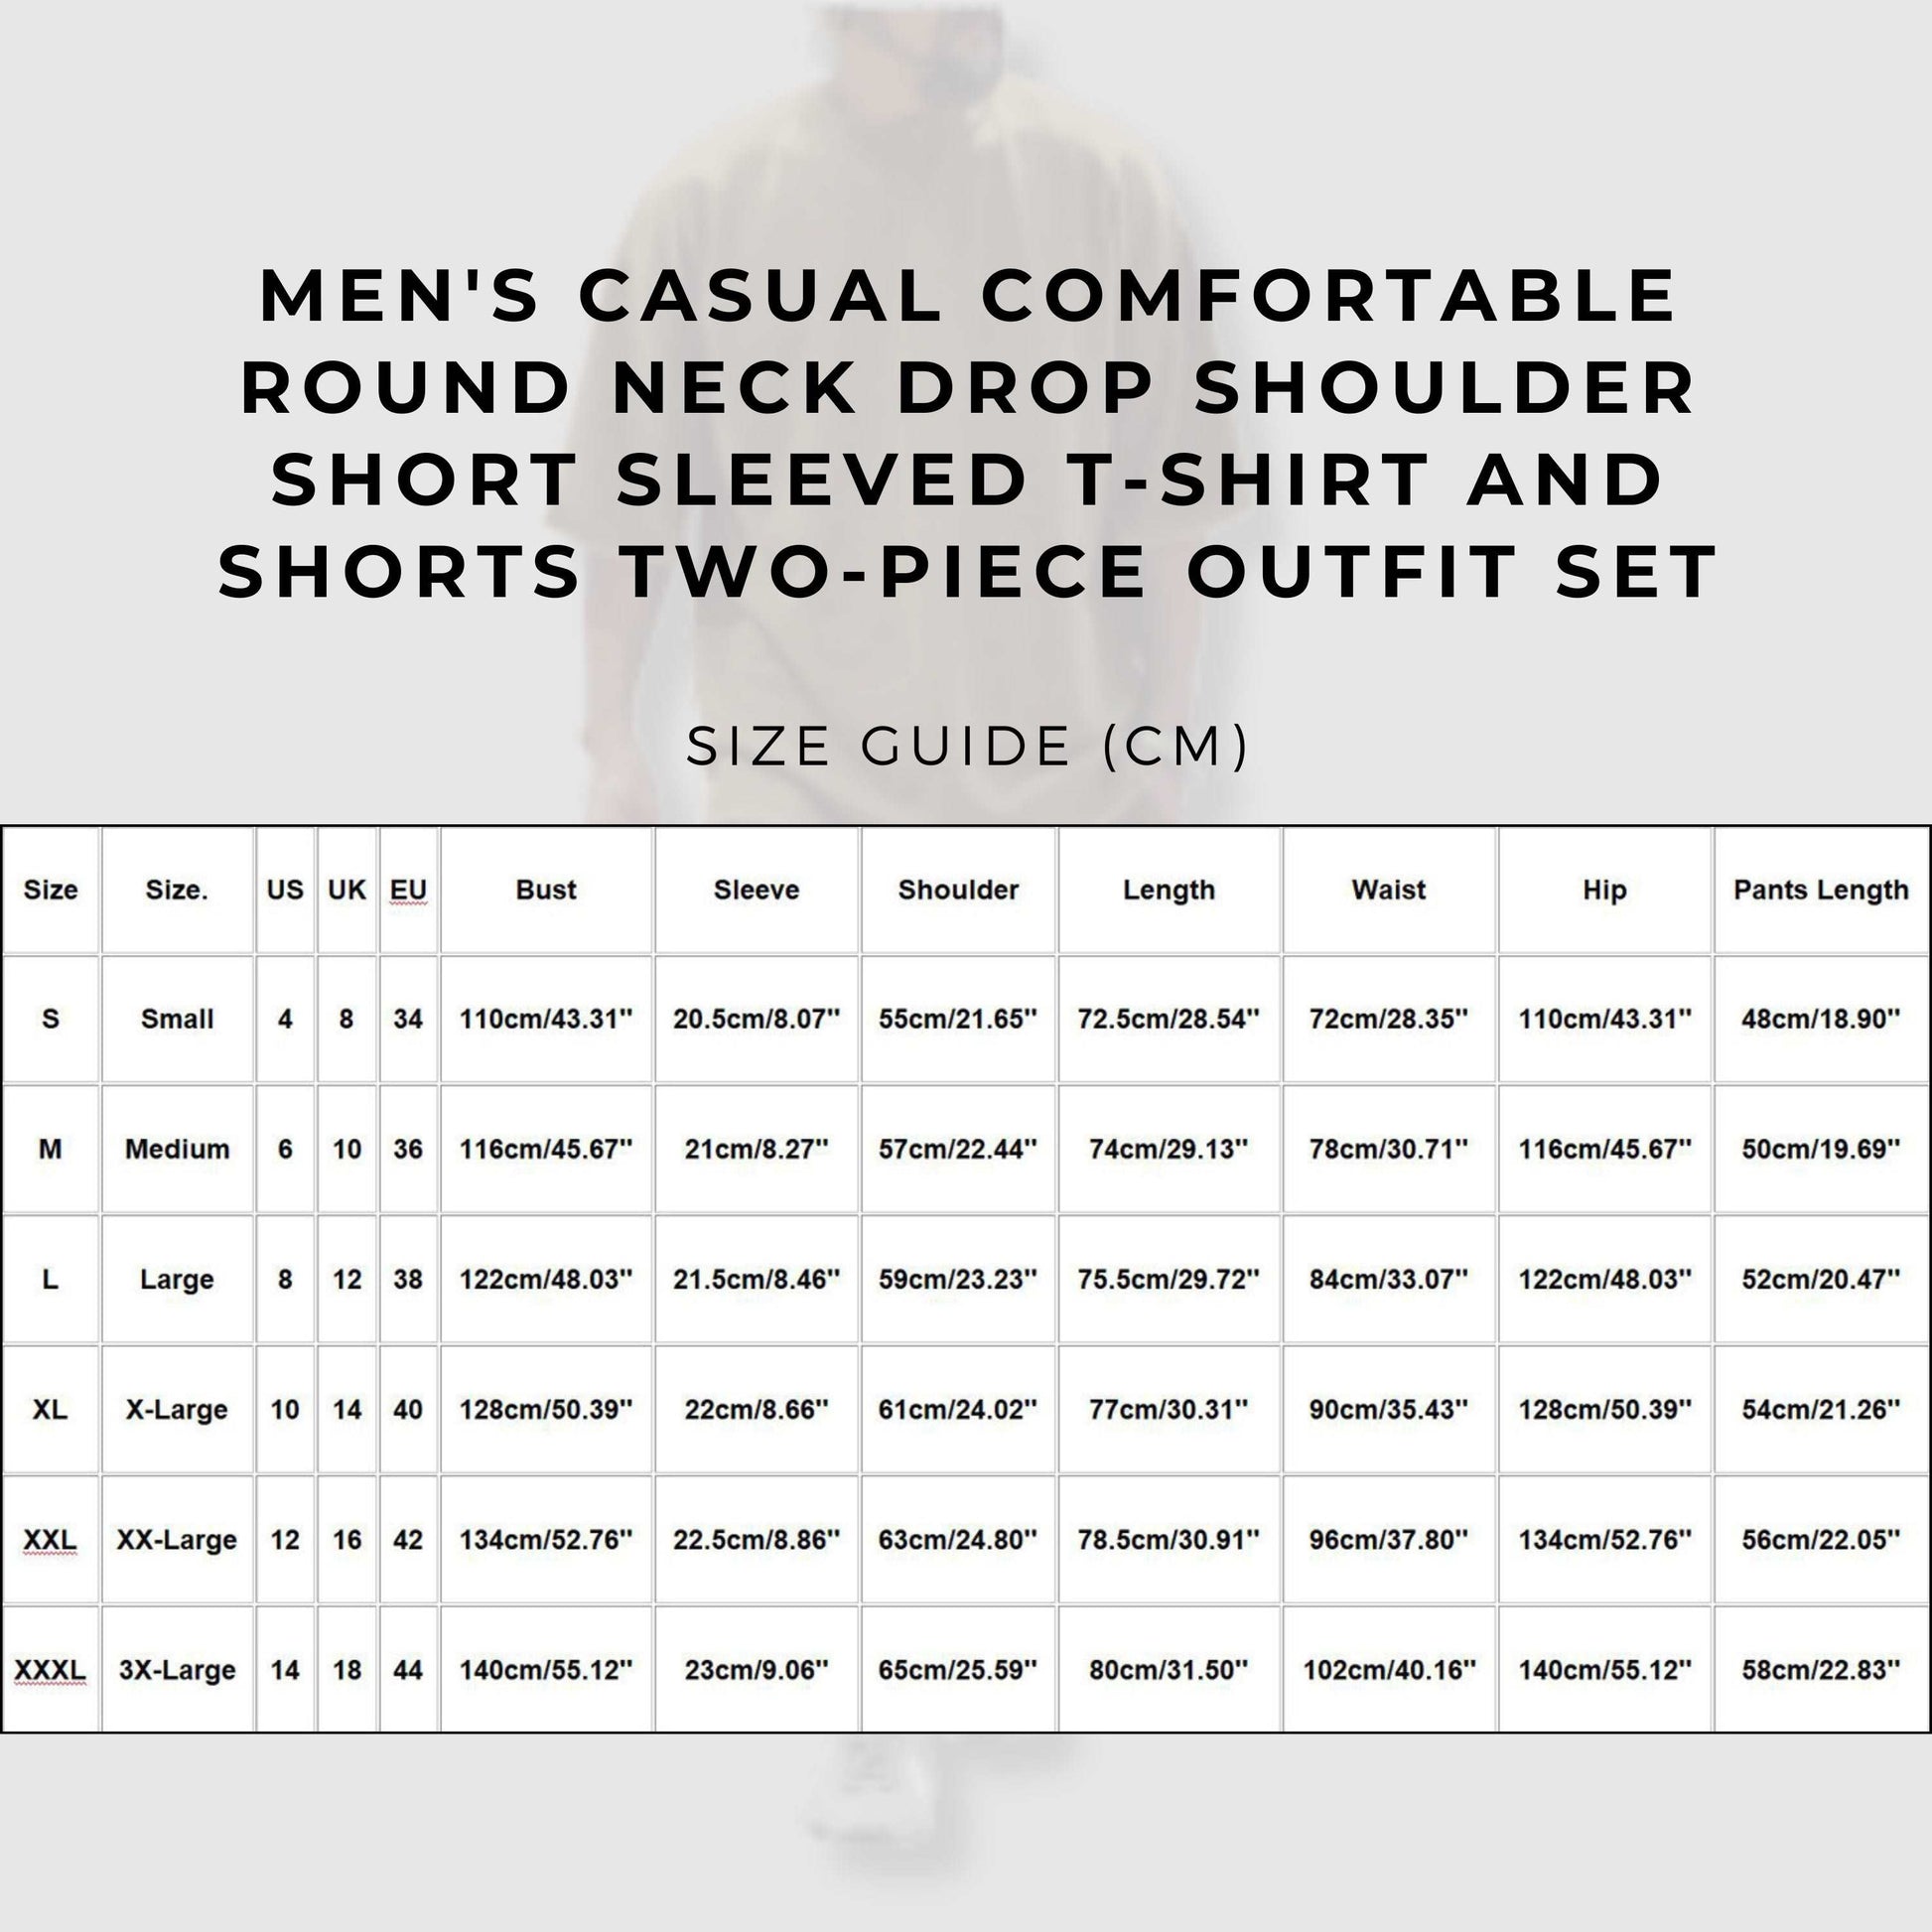 Men's Casual Comfortable Round Neck Drop Shoulder Short Sleeved T-shirt and Shorts Two-piece Outfit Set size